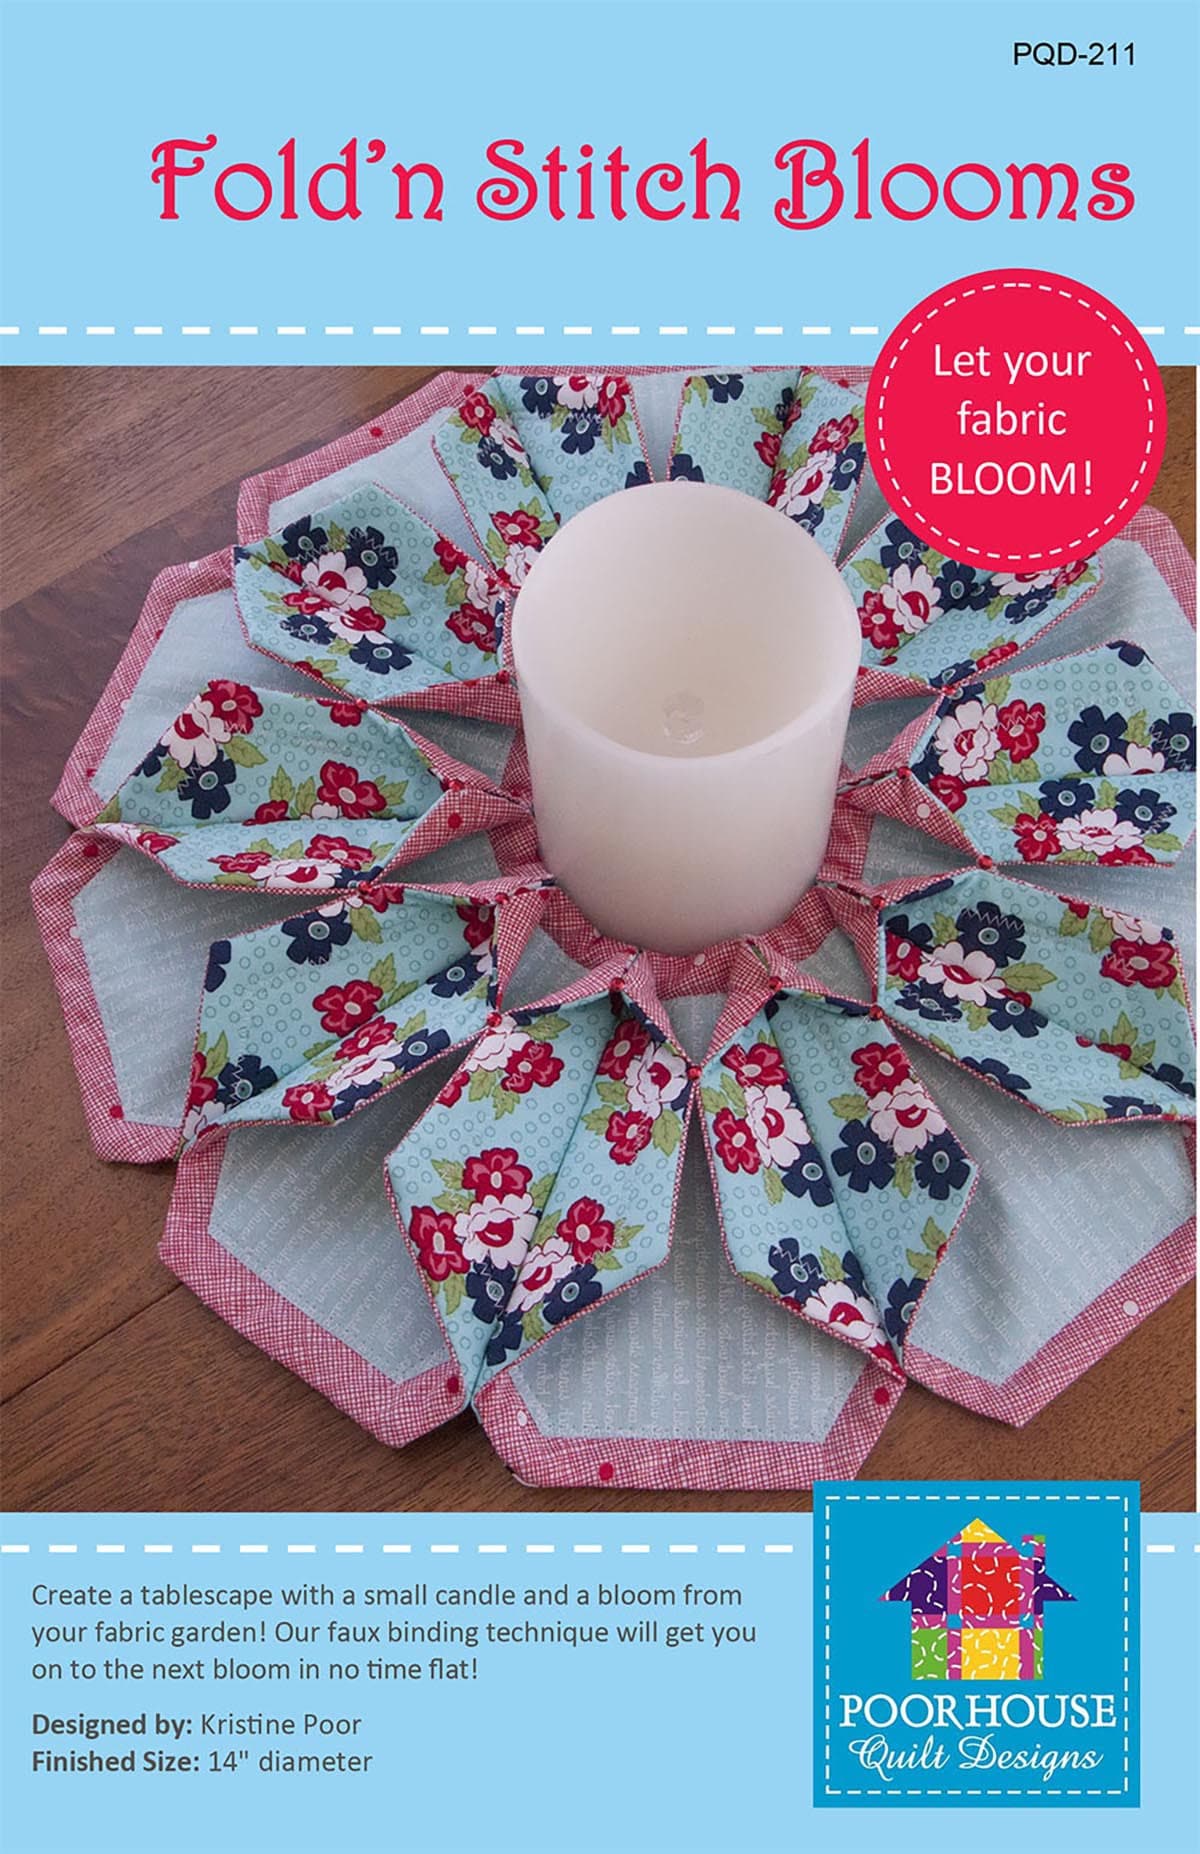 Fold'n Stitch Blooms Sewing Pattern by Kris Poor of Poorhouse Quilt Designs